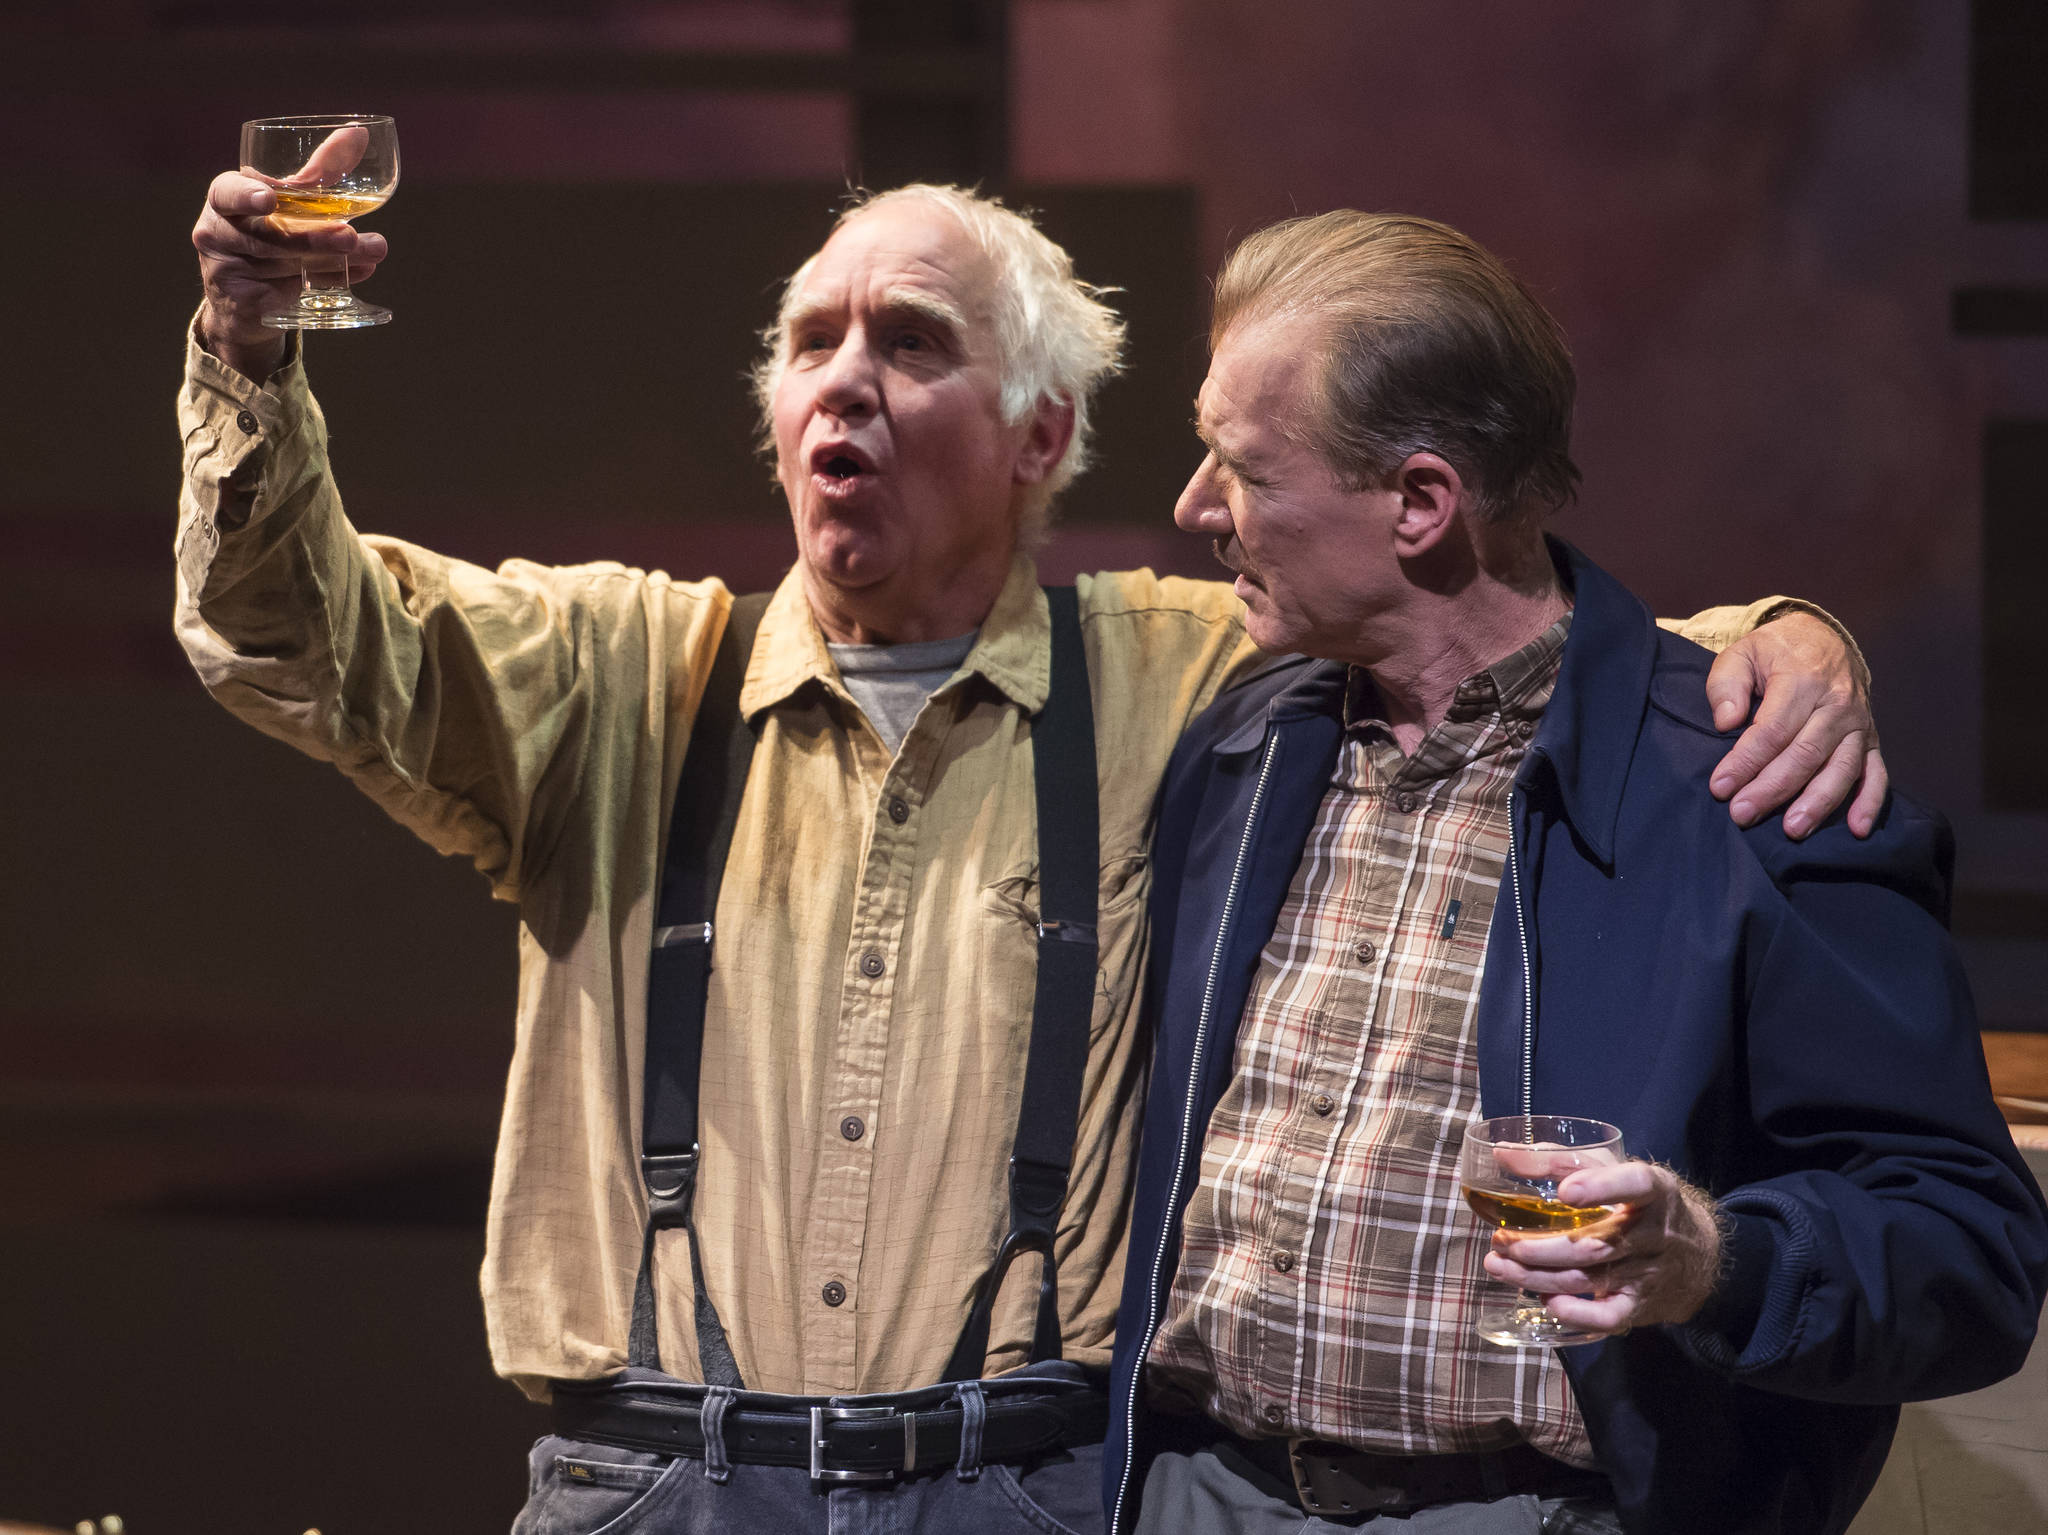 John Barrymore, played by Peter DeLaurier, right, and Joe, played by Mike Peterson,share a drink during Perseverance Theatre’s production of Joel Bennett’s “Dreaming Glacier Bay” on Tuesday, Oct. 25, 2017. (Michael Penn | Capital City Weekly)